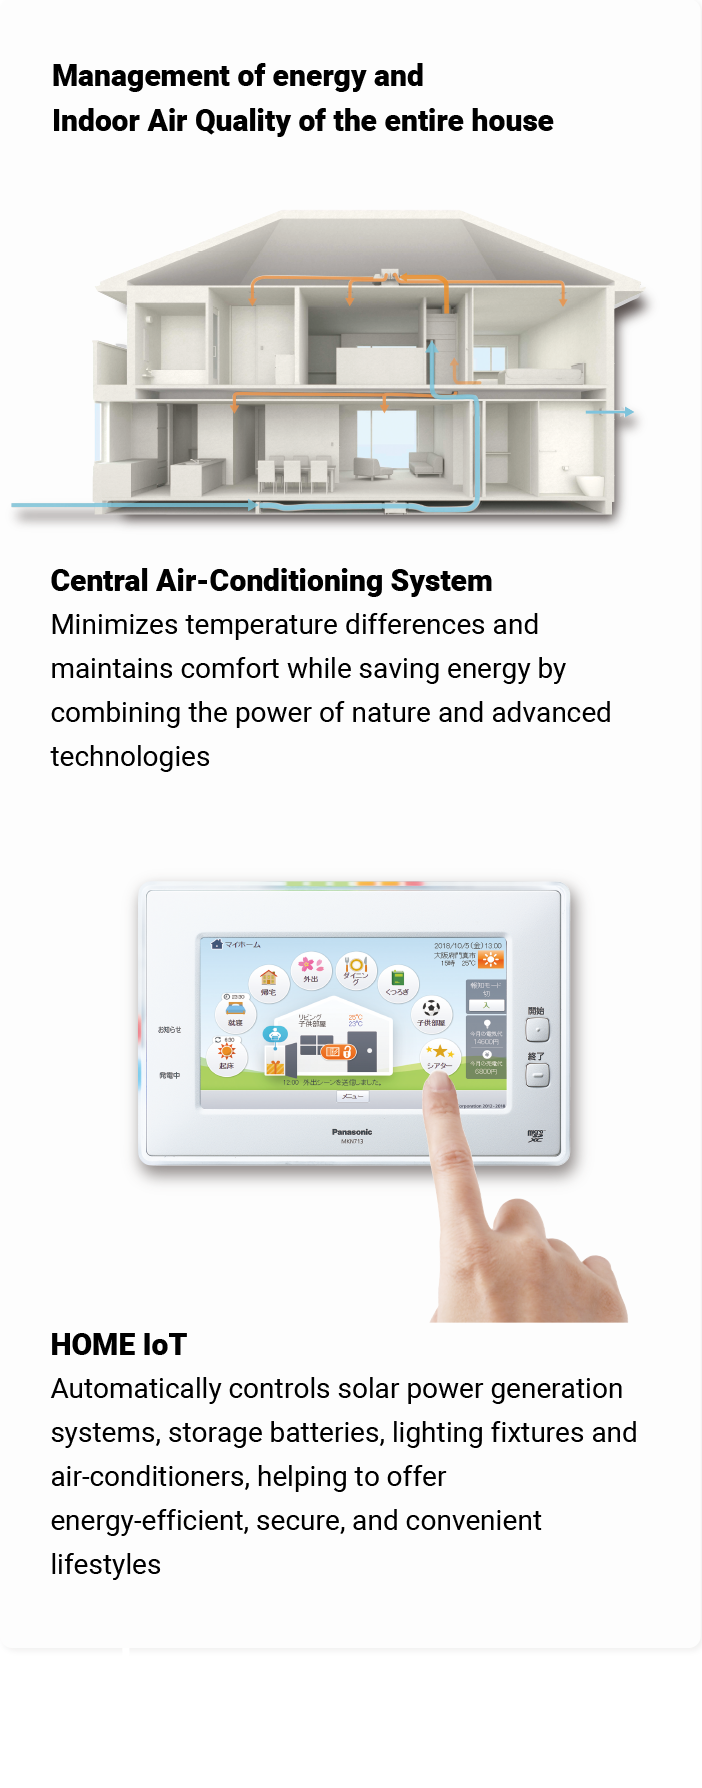 Central Air-Conditioning System Minimizes temperature differences and maintains comfort while saving energy by combining the power of nature and advanced technologies HOME IoT Automatically controls solar power generation systems, storage batteries, lighting fixtures and air-conditioners, helping to offer energy-efficient, secure, and convenient lifestyles